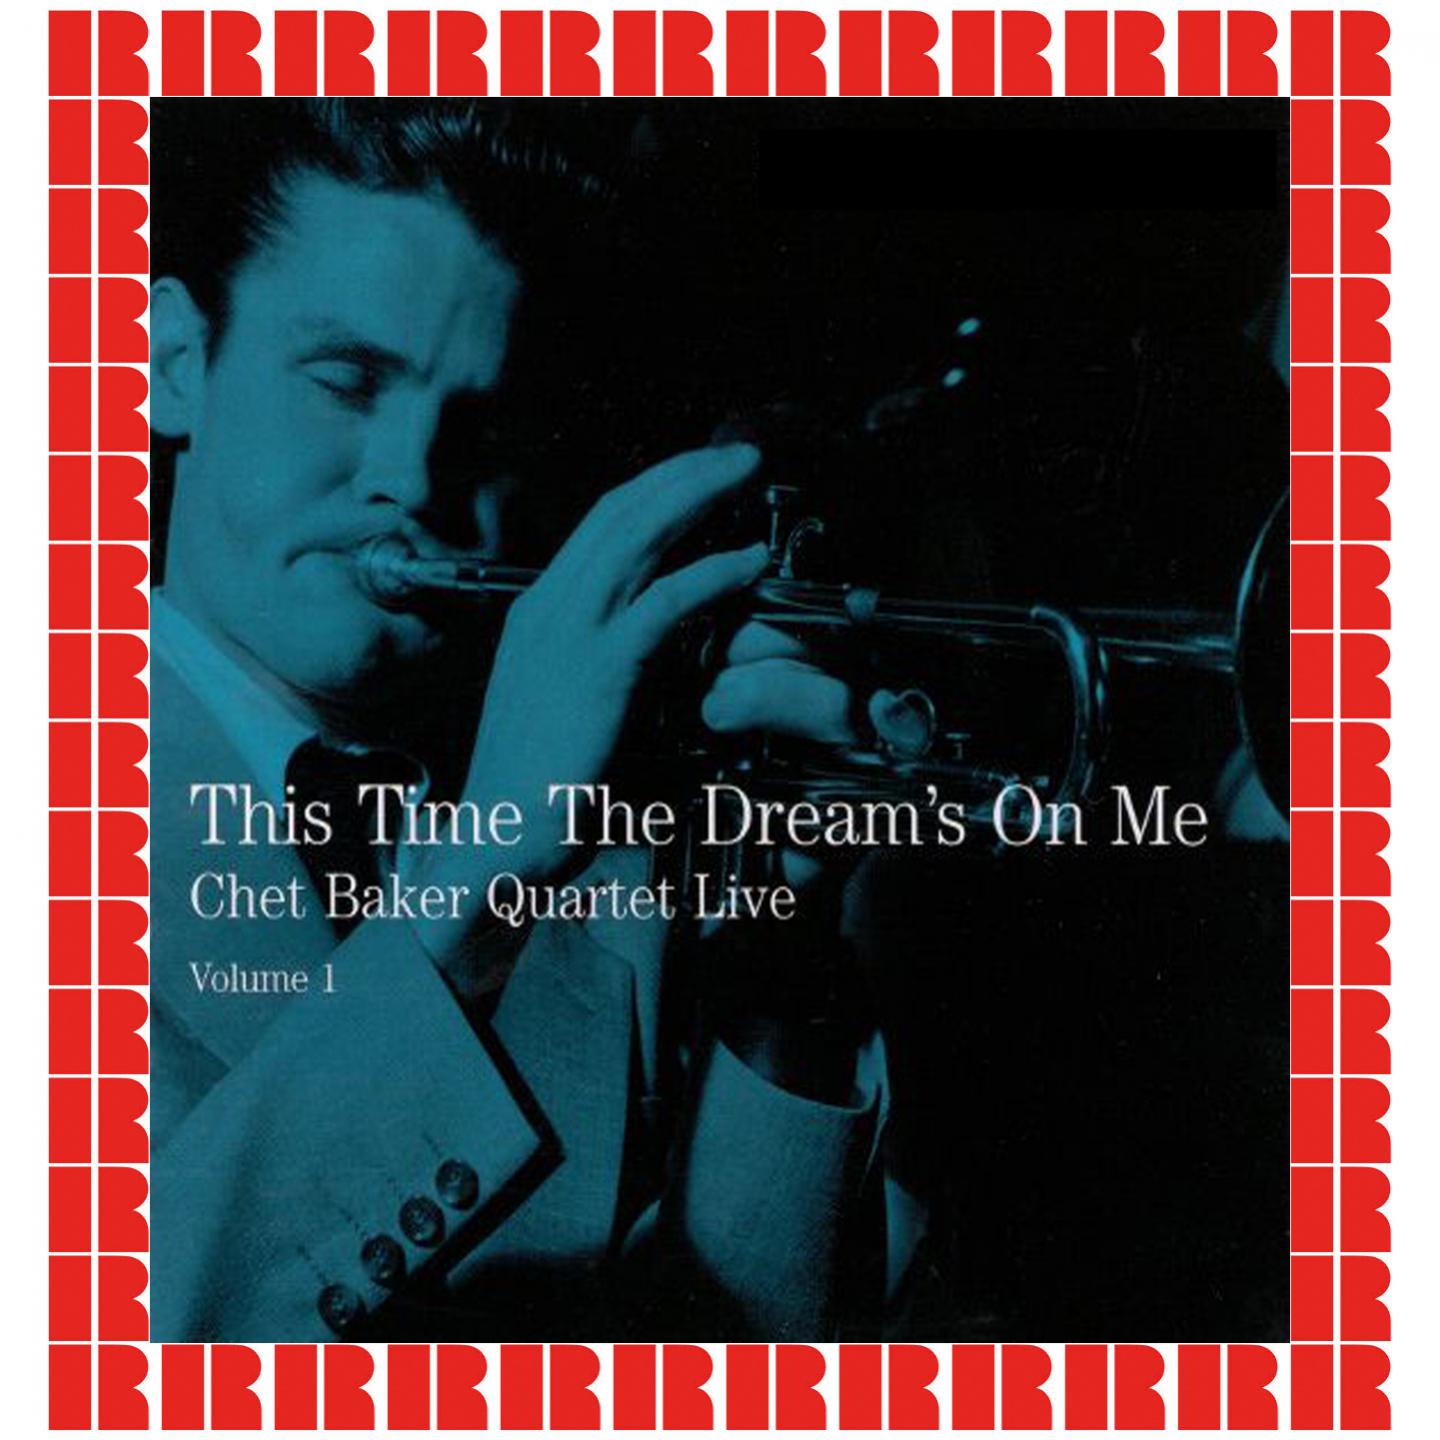 Live Volume 1 - This Time The Dream's On Me (Hd Remastered Edition)专辑